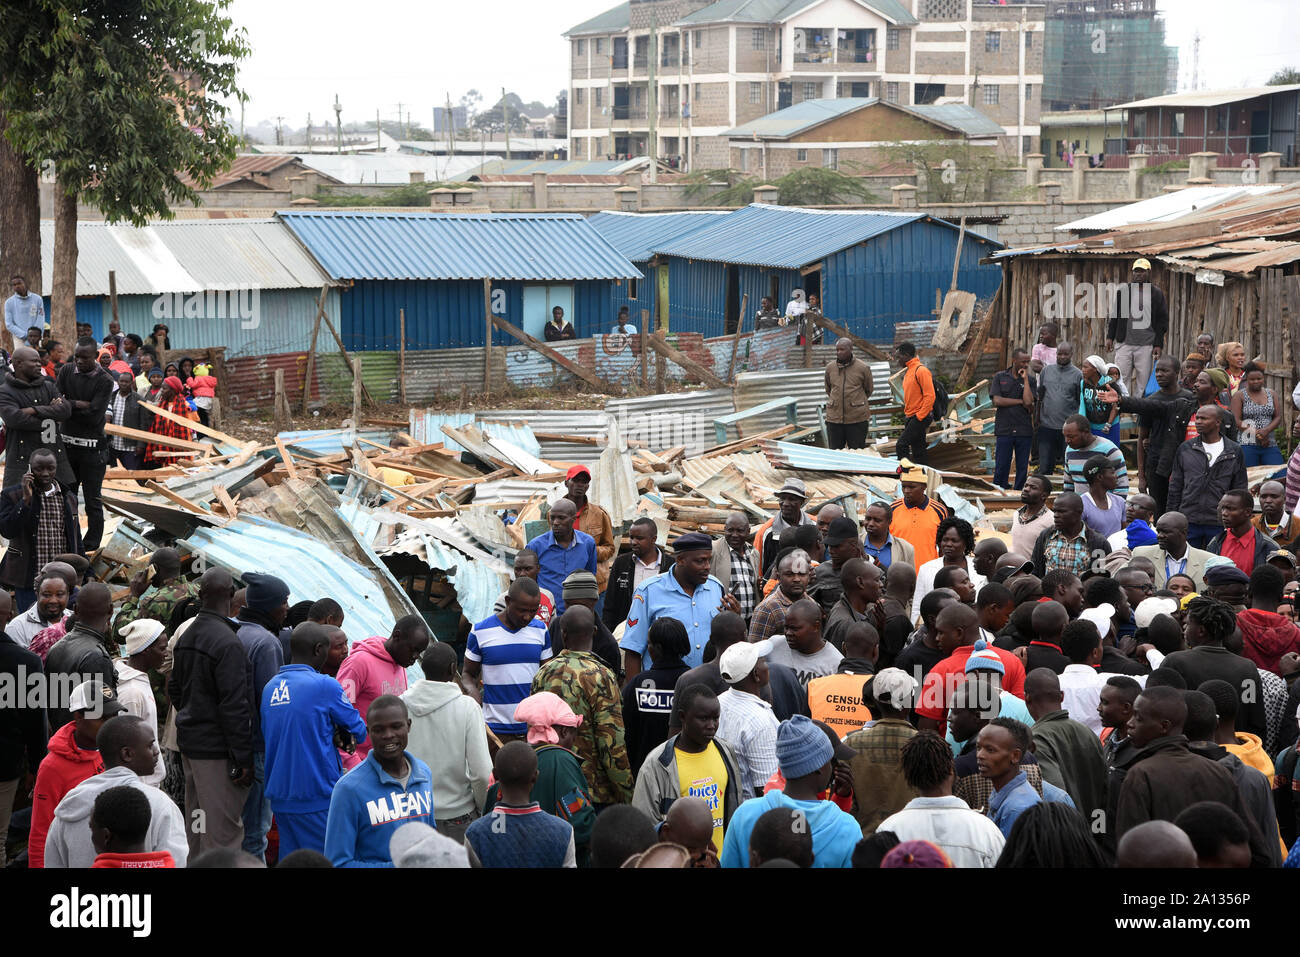 Nairobi, Kenya. 23rd Sep, 2019. People stand at the scene where a classroom collapsed in Nairobi, capital of Kenya, on Sept. 23, 2019. At least seven pupils were killed and 59 others injured early Monday after their classroom collapsed at a school compound in Nairobi, government and charity officials said. Credit: John Okoyo/Xinhua Credit: Xinhua/Alamy Live News Stock Photo